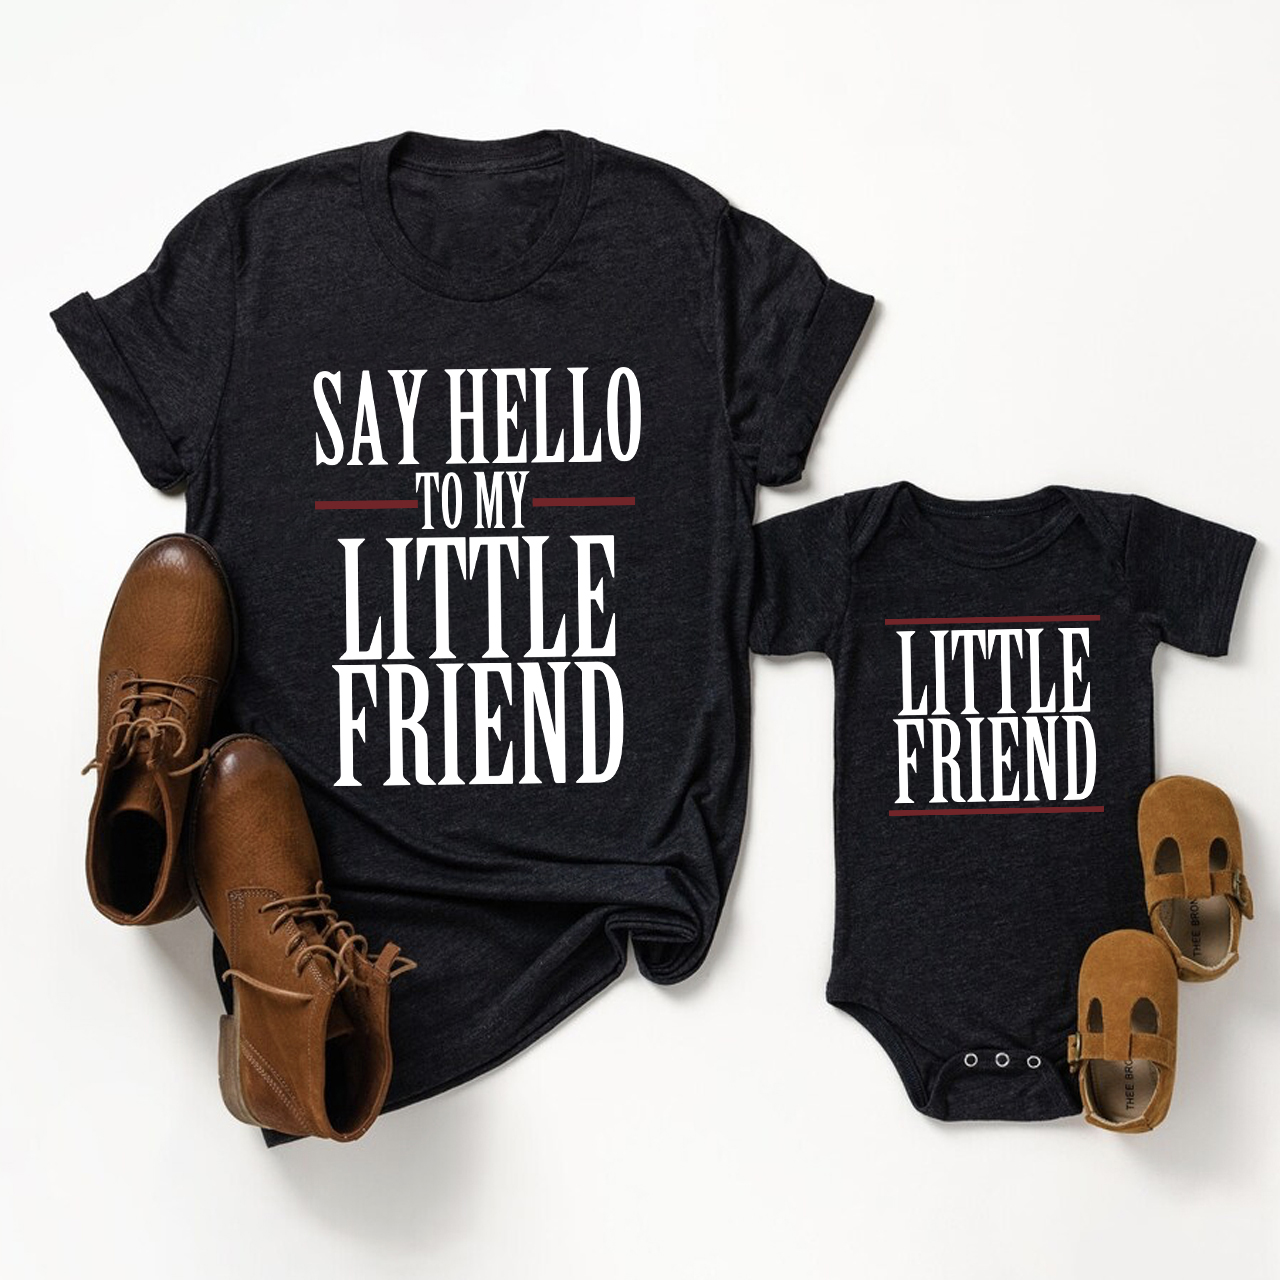 Say Hello To My Little Friend Matching Tees For Father's Day